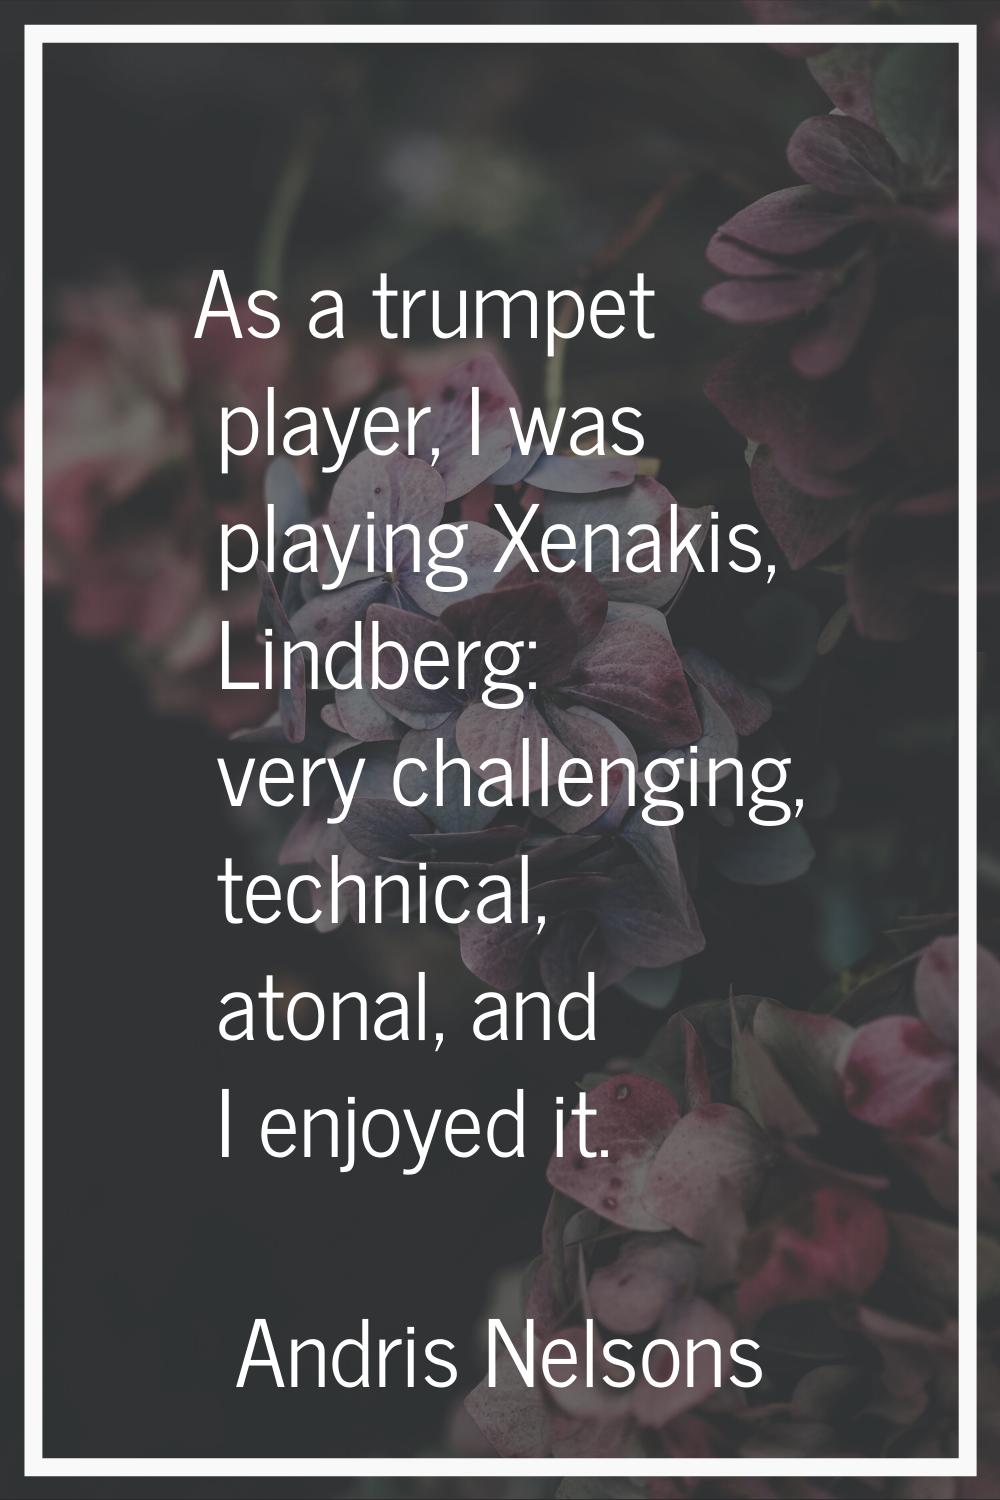 As a trumpet player, I was playing Xenakis, Lindberg: very challenging, technical, atonal, and I en